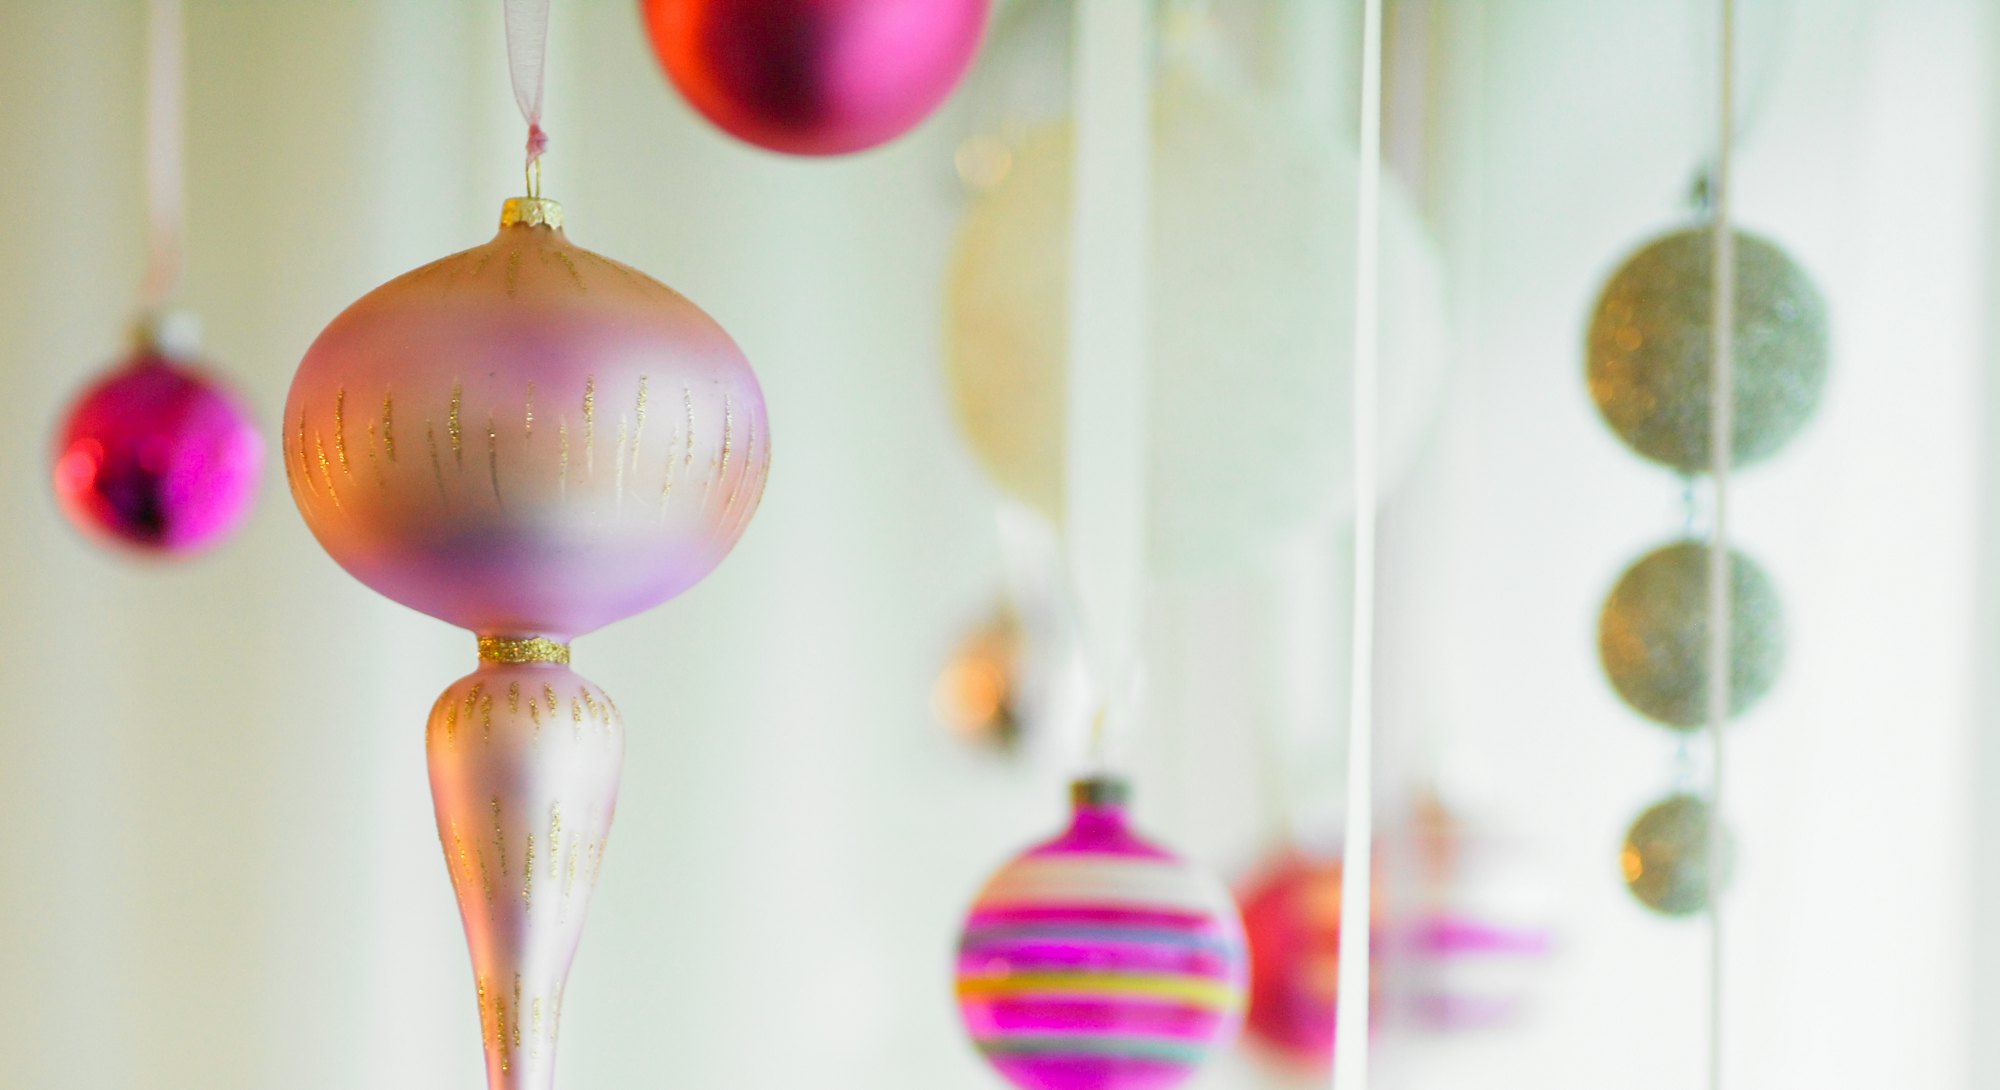 vintage glass ornaments hanging from ribbon